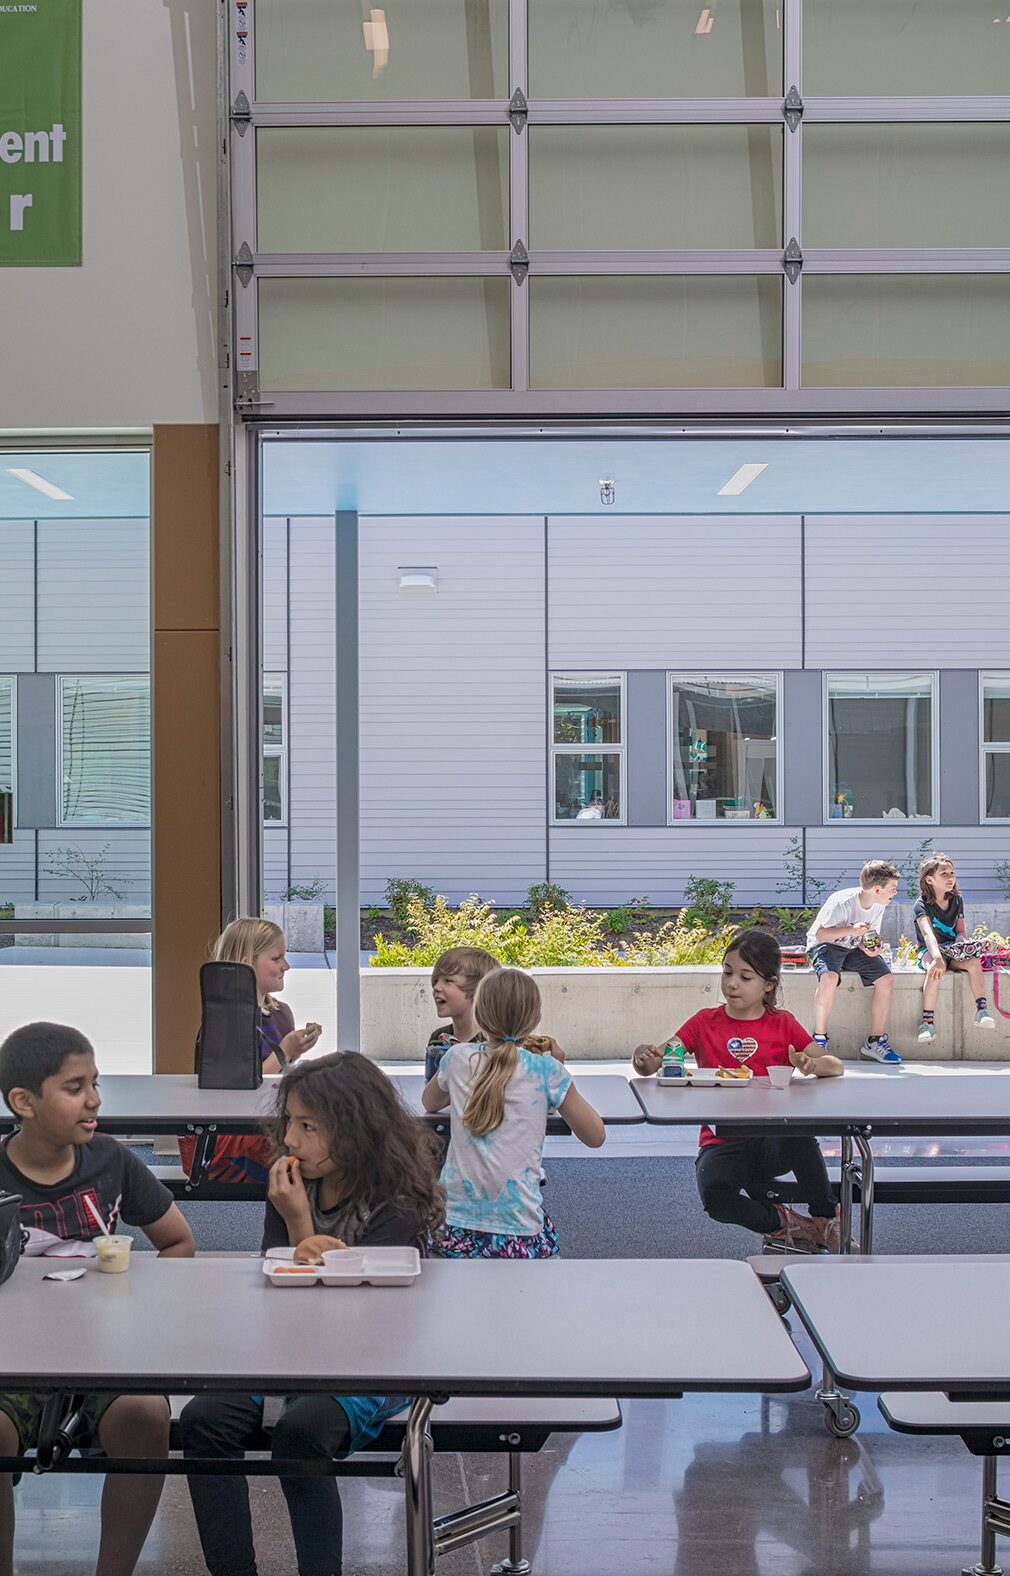 Schools have long been a source of reliable nutrition for students, often providing breakfast and lunch options as well as snacks. (Happy Valley Elementary School, Bellingham, Washington - NAC)